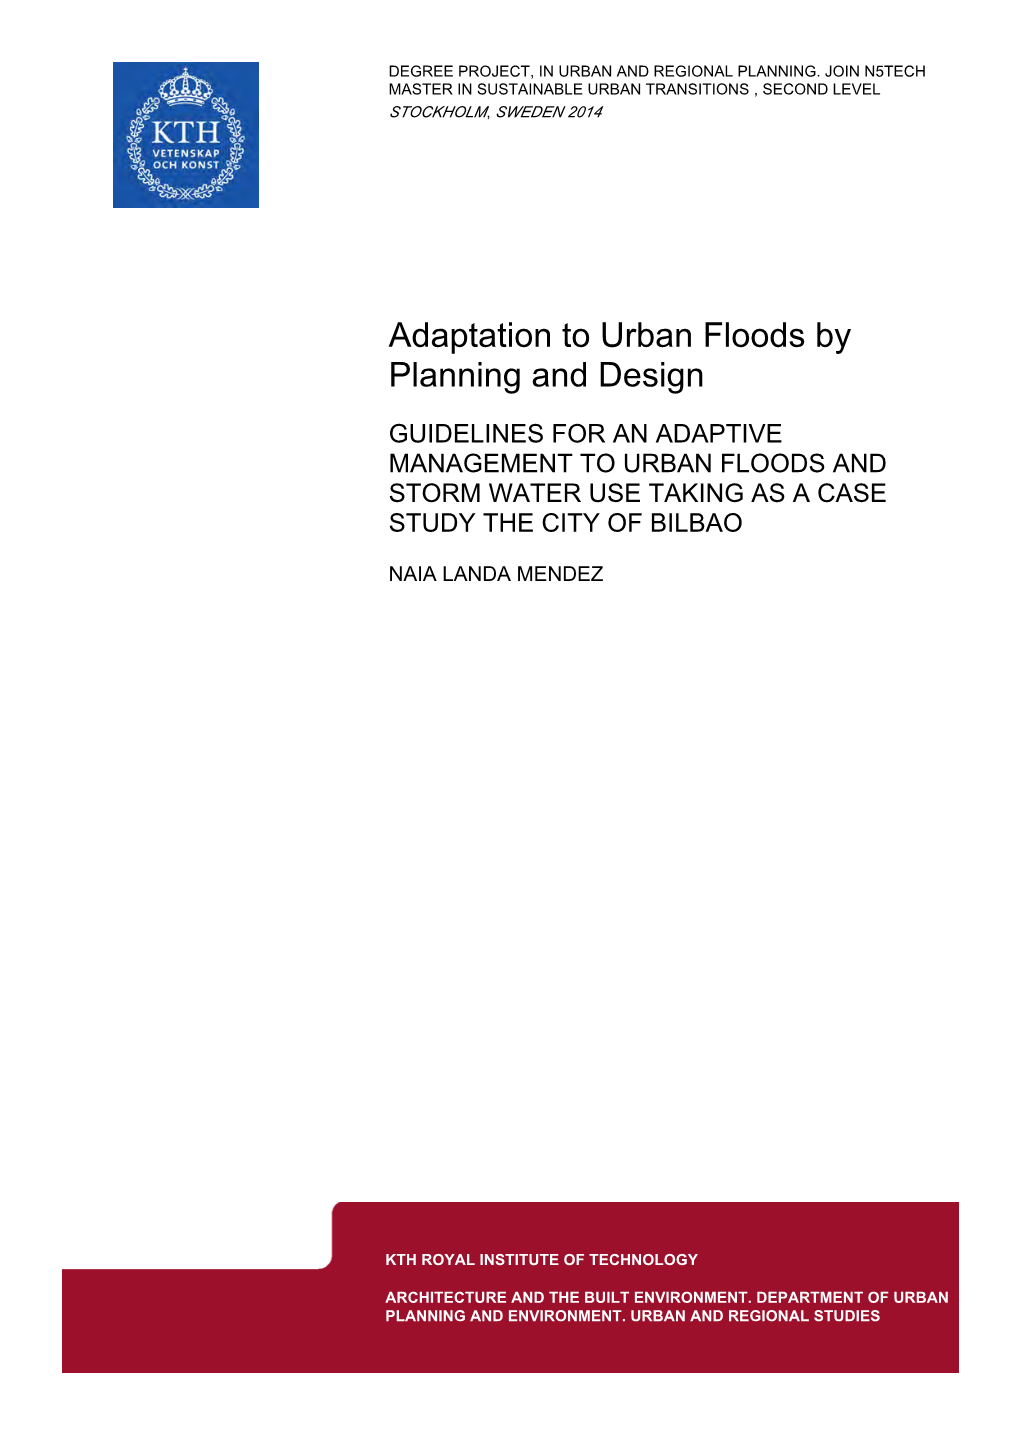 Adaptation to Urban Floods by Planning and Design